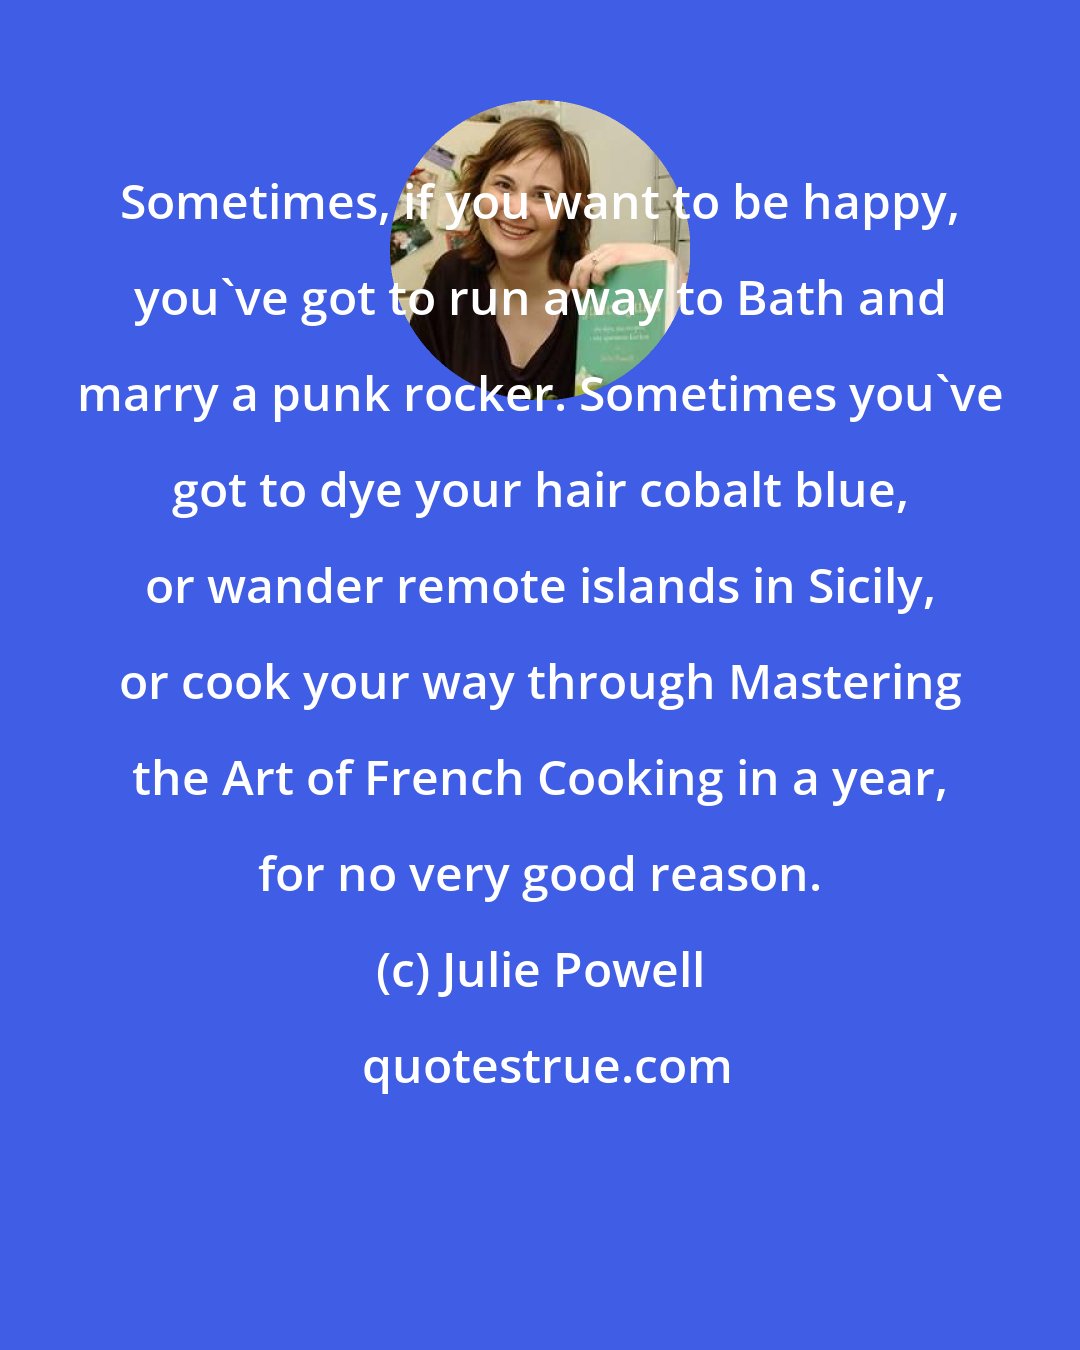 Julie Powell: Sometimes, if you want to be happy, you've got to run away to Bath and marry a punk rocker. Sometimes you've got to dye your hair cobalt blue, or wander remote islands in Sicily, or cook your way through Mastering the Art of French Cooking in a year, for no very good reason.